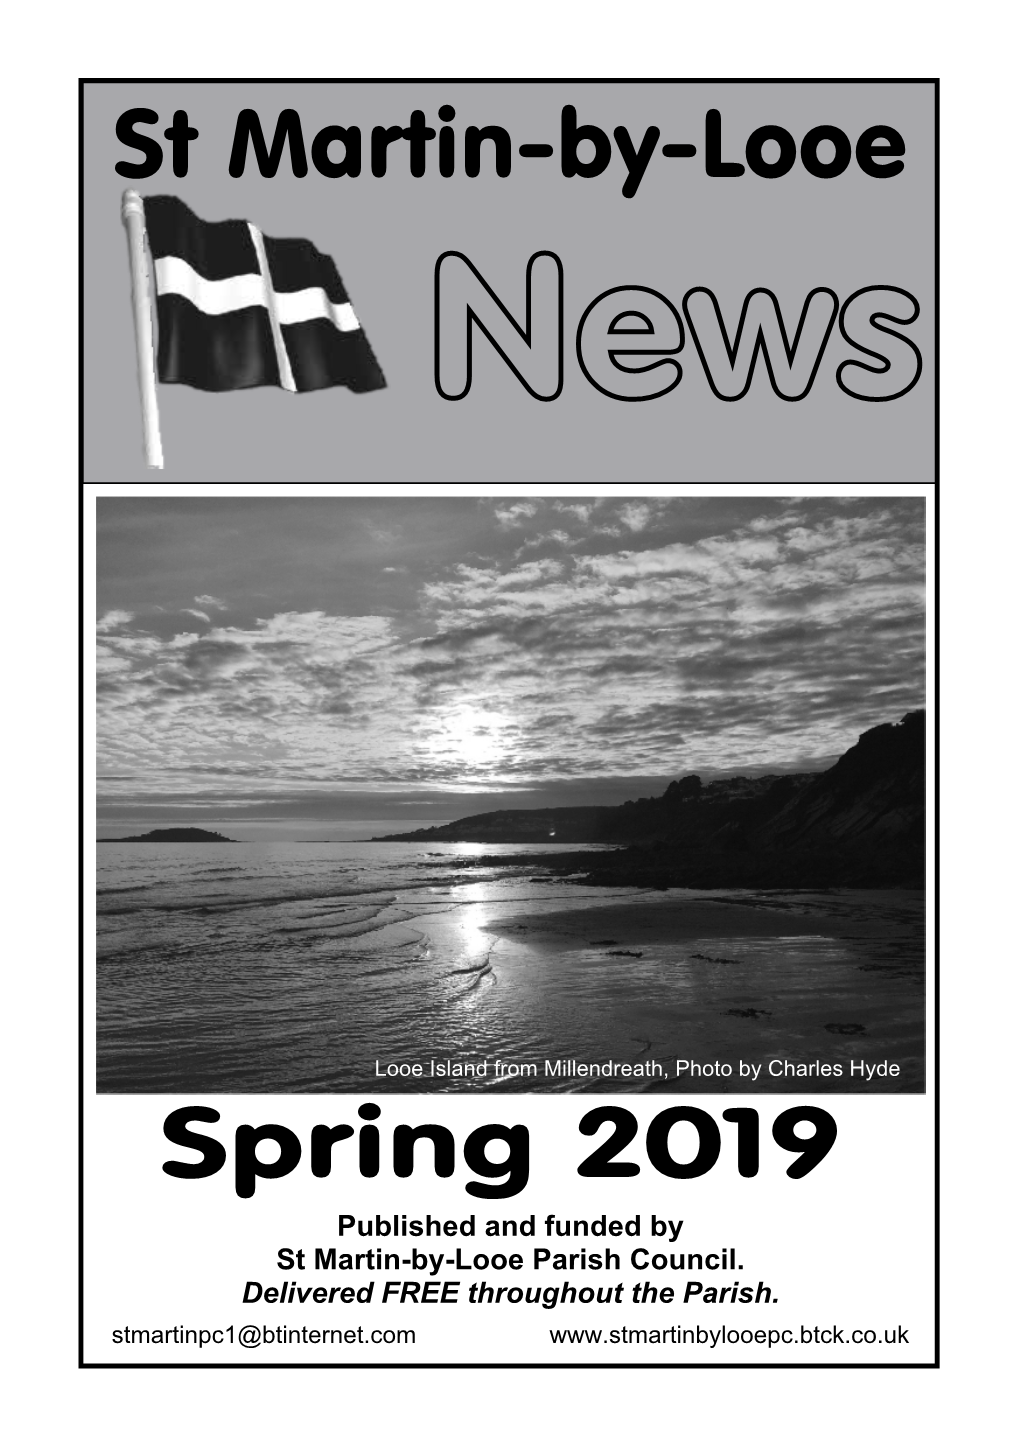 Spring 2019 Published and Funded by St Martin-By-Looe Parish Council